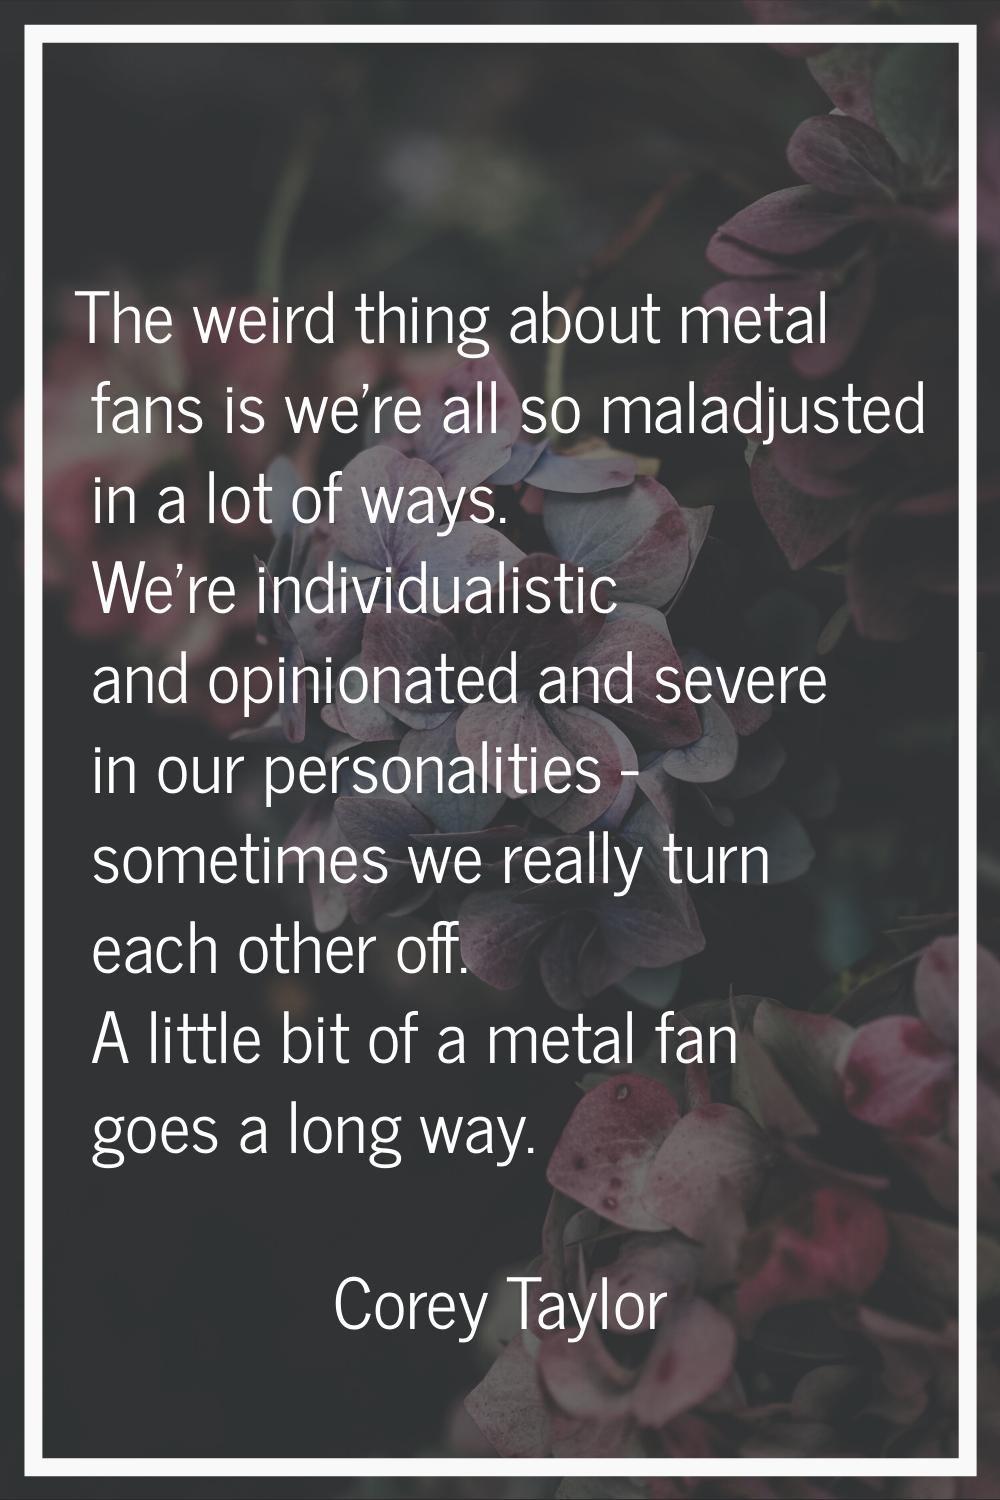 The weird thing about metal fans is we're all so maladjusted in a lot of ways. We're individualisti